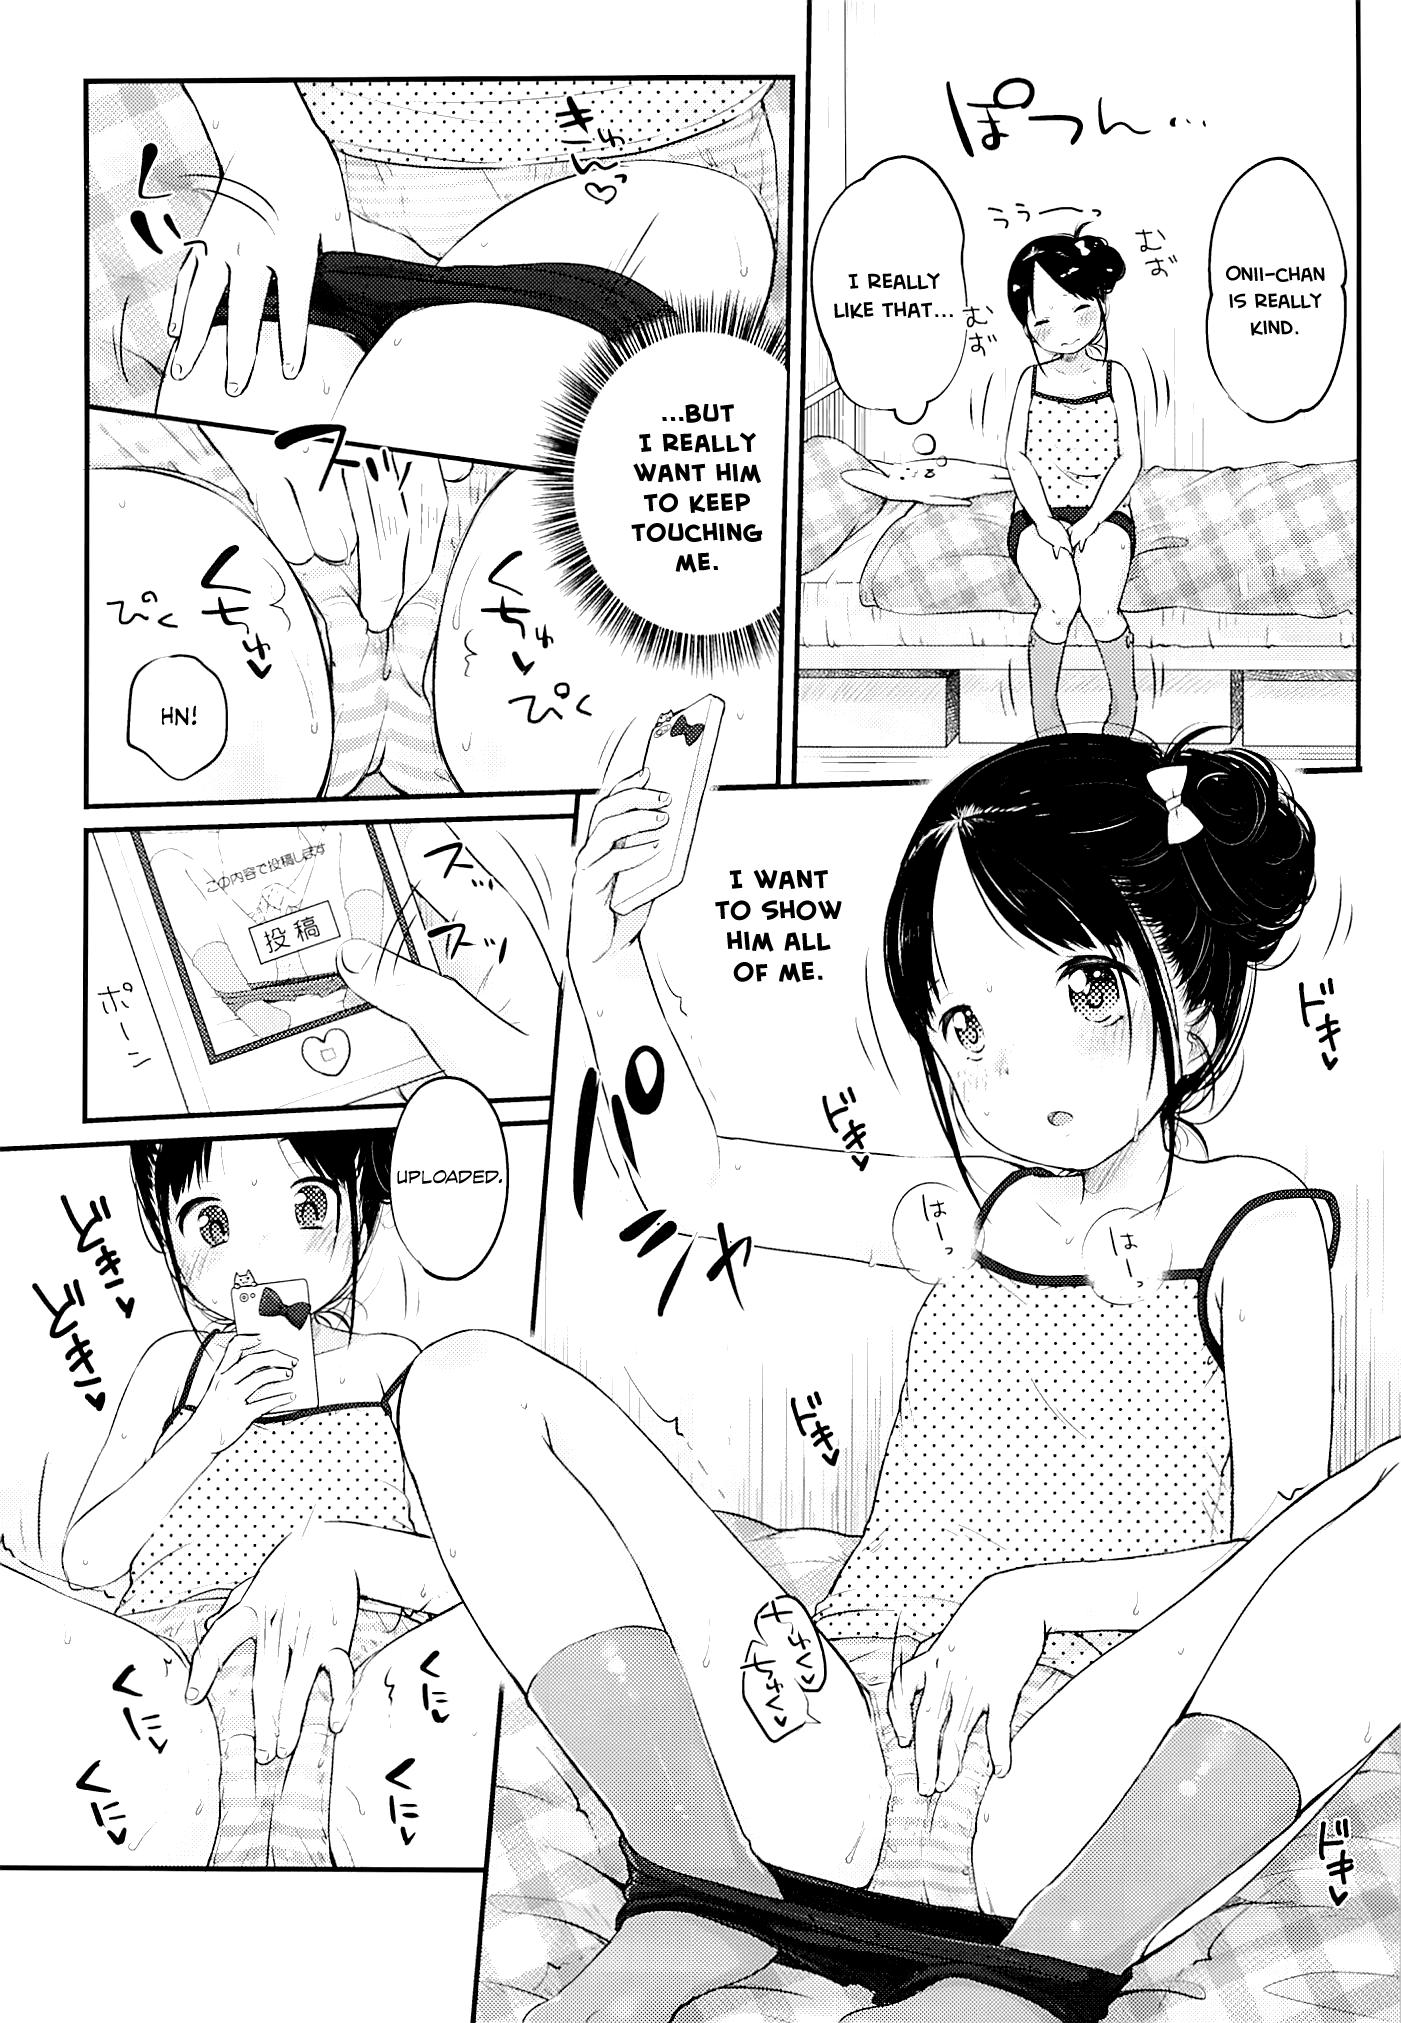 Sex Party Imouto@JC Uraaka | sister@JC side-account Teens - Page 5